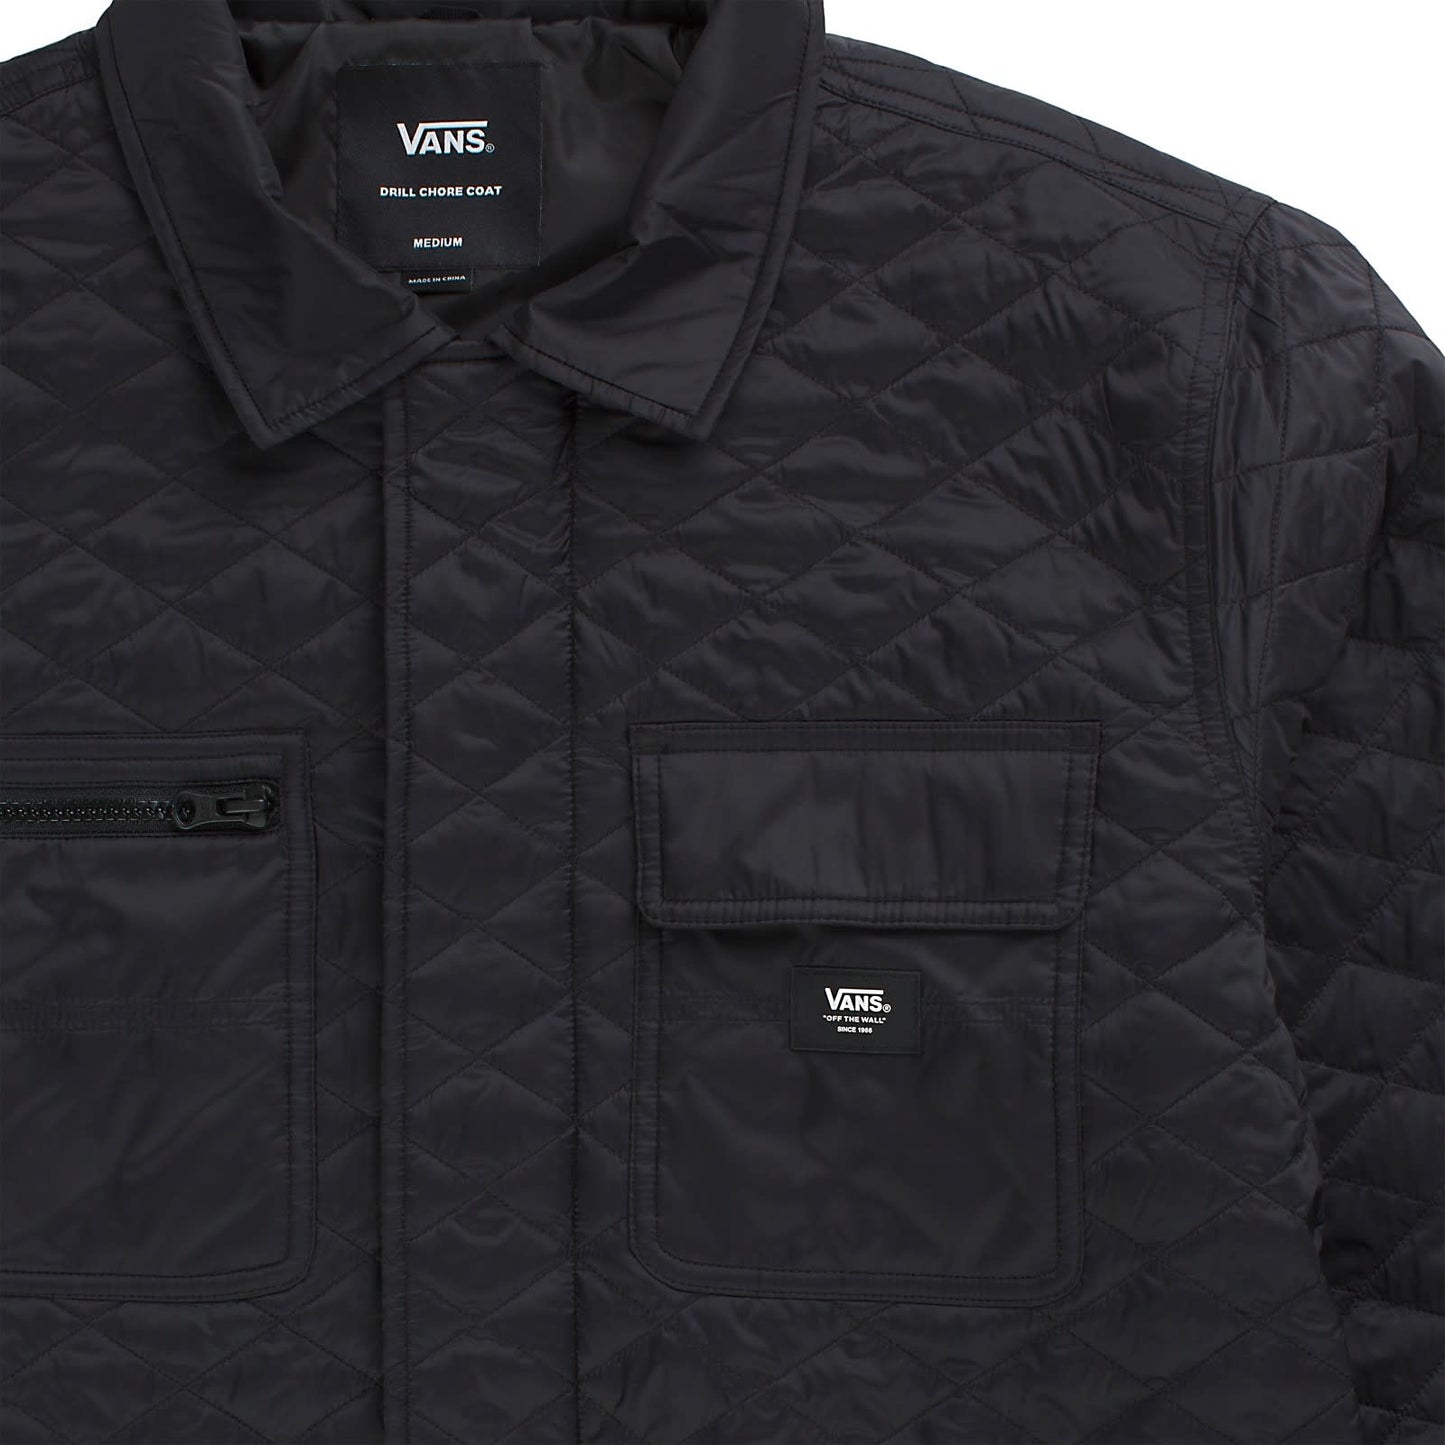 VANS - DRILL CHORE COAT THERMOBALL MTE-1 JACKET